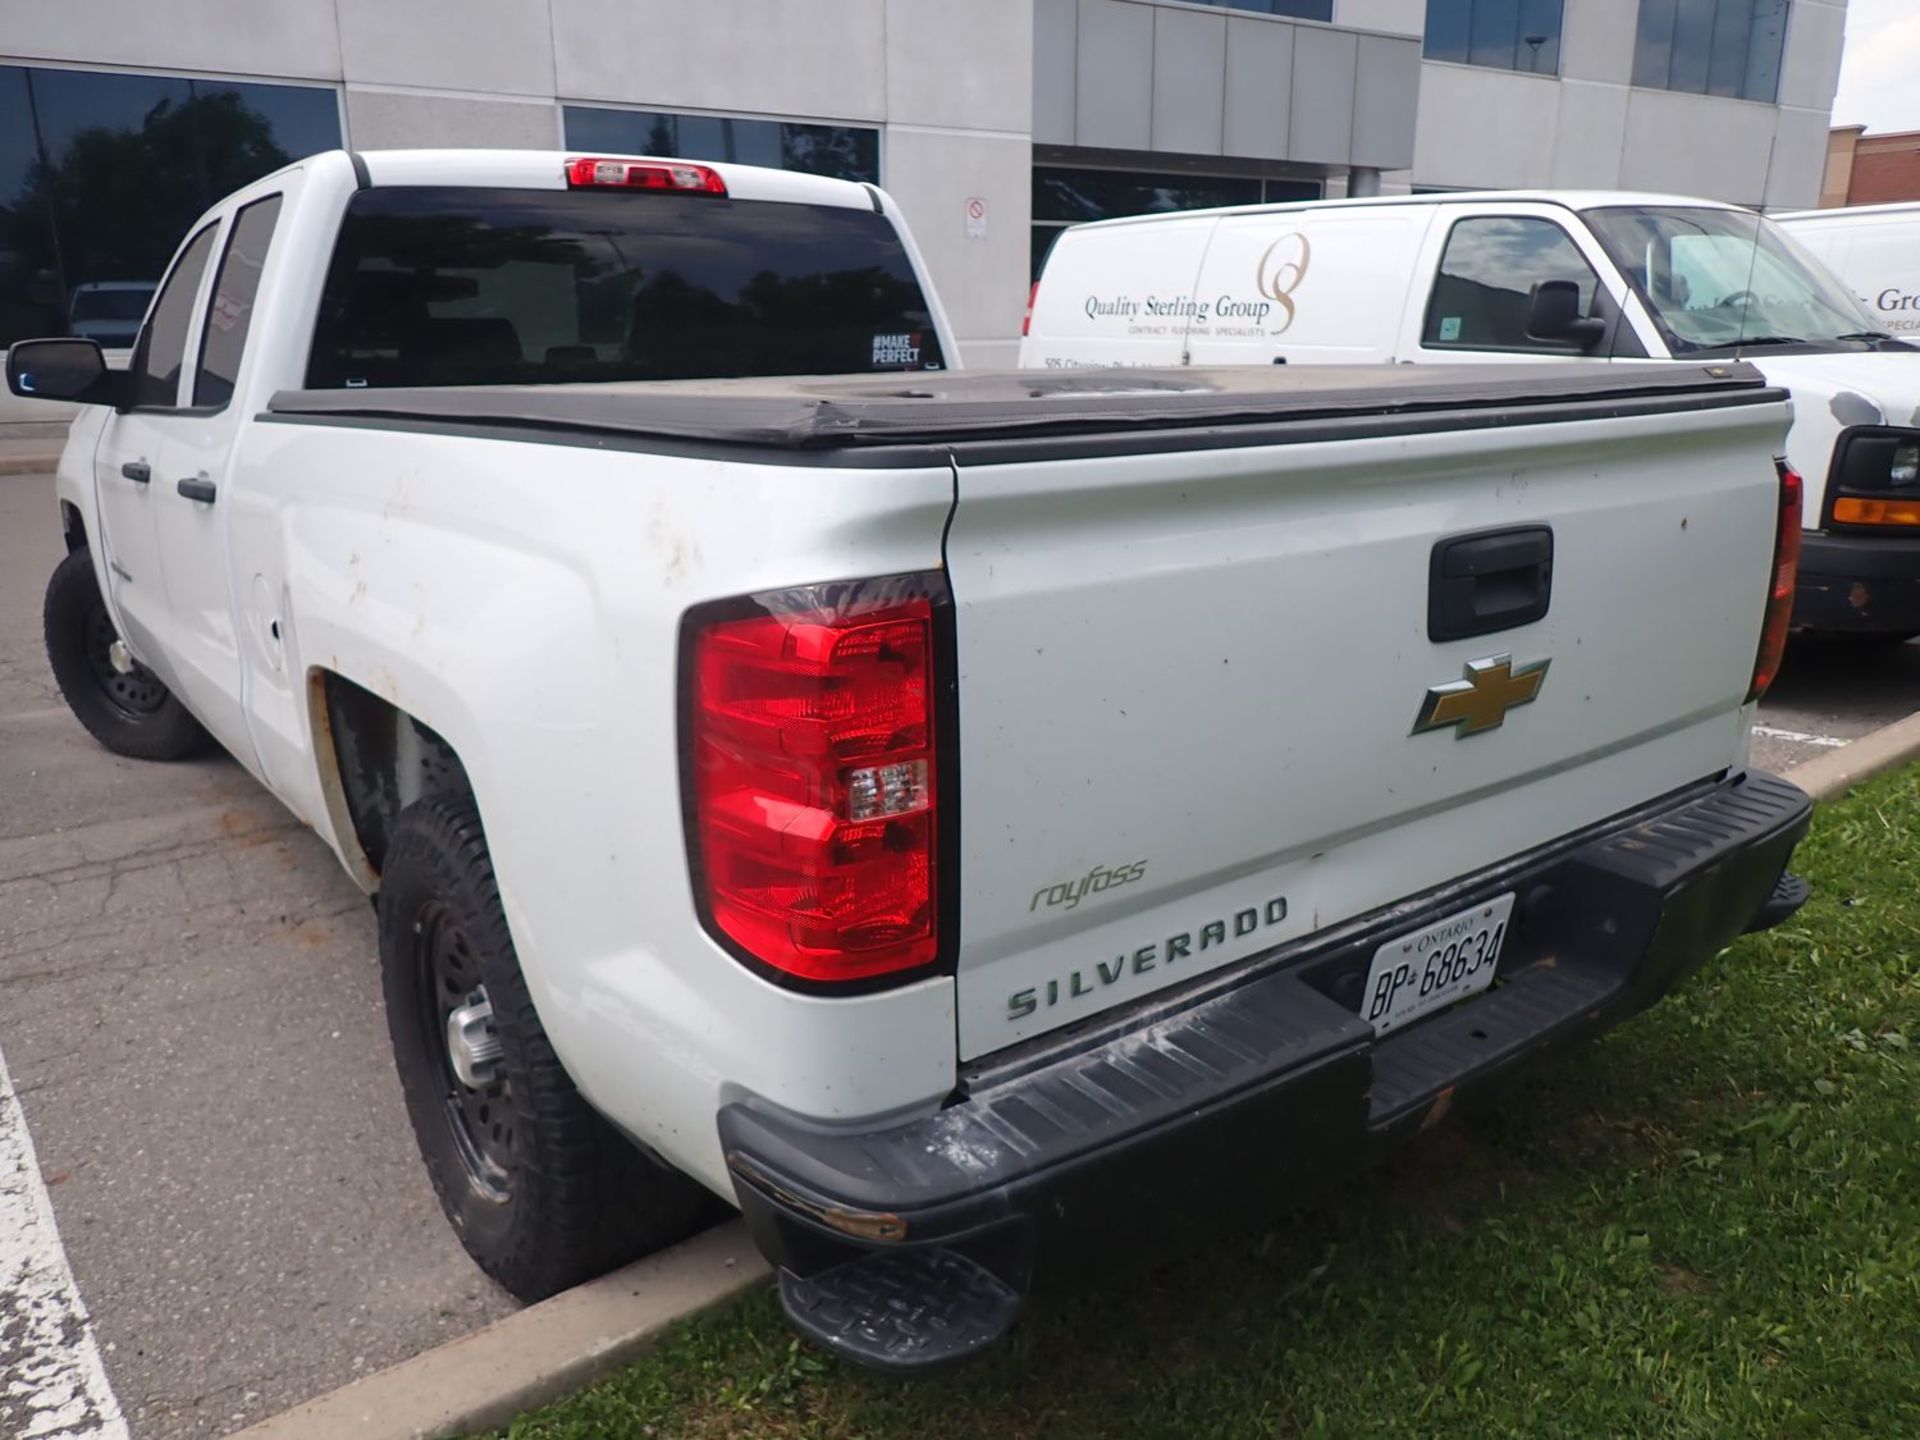 2015 CHEVROLET SILVERADO 1500 DOUBLE CAB 2WD PICKUP TRUCK, VIN 1GCRCPEH1FZ156736 (334,500 KM)(AS IS) - Image 6 of 13